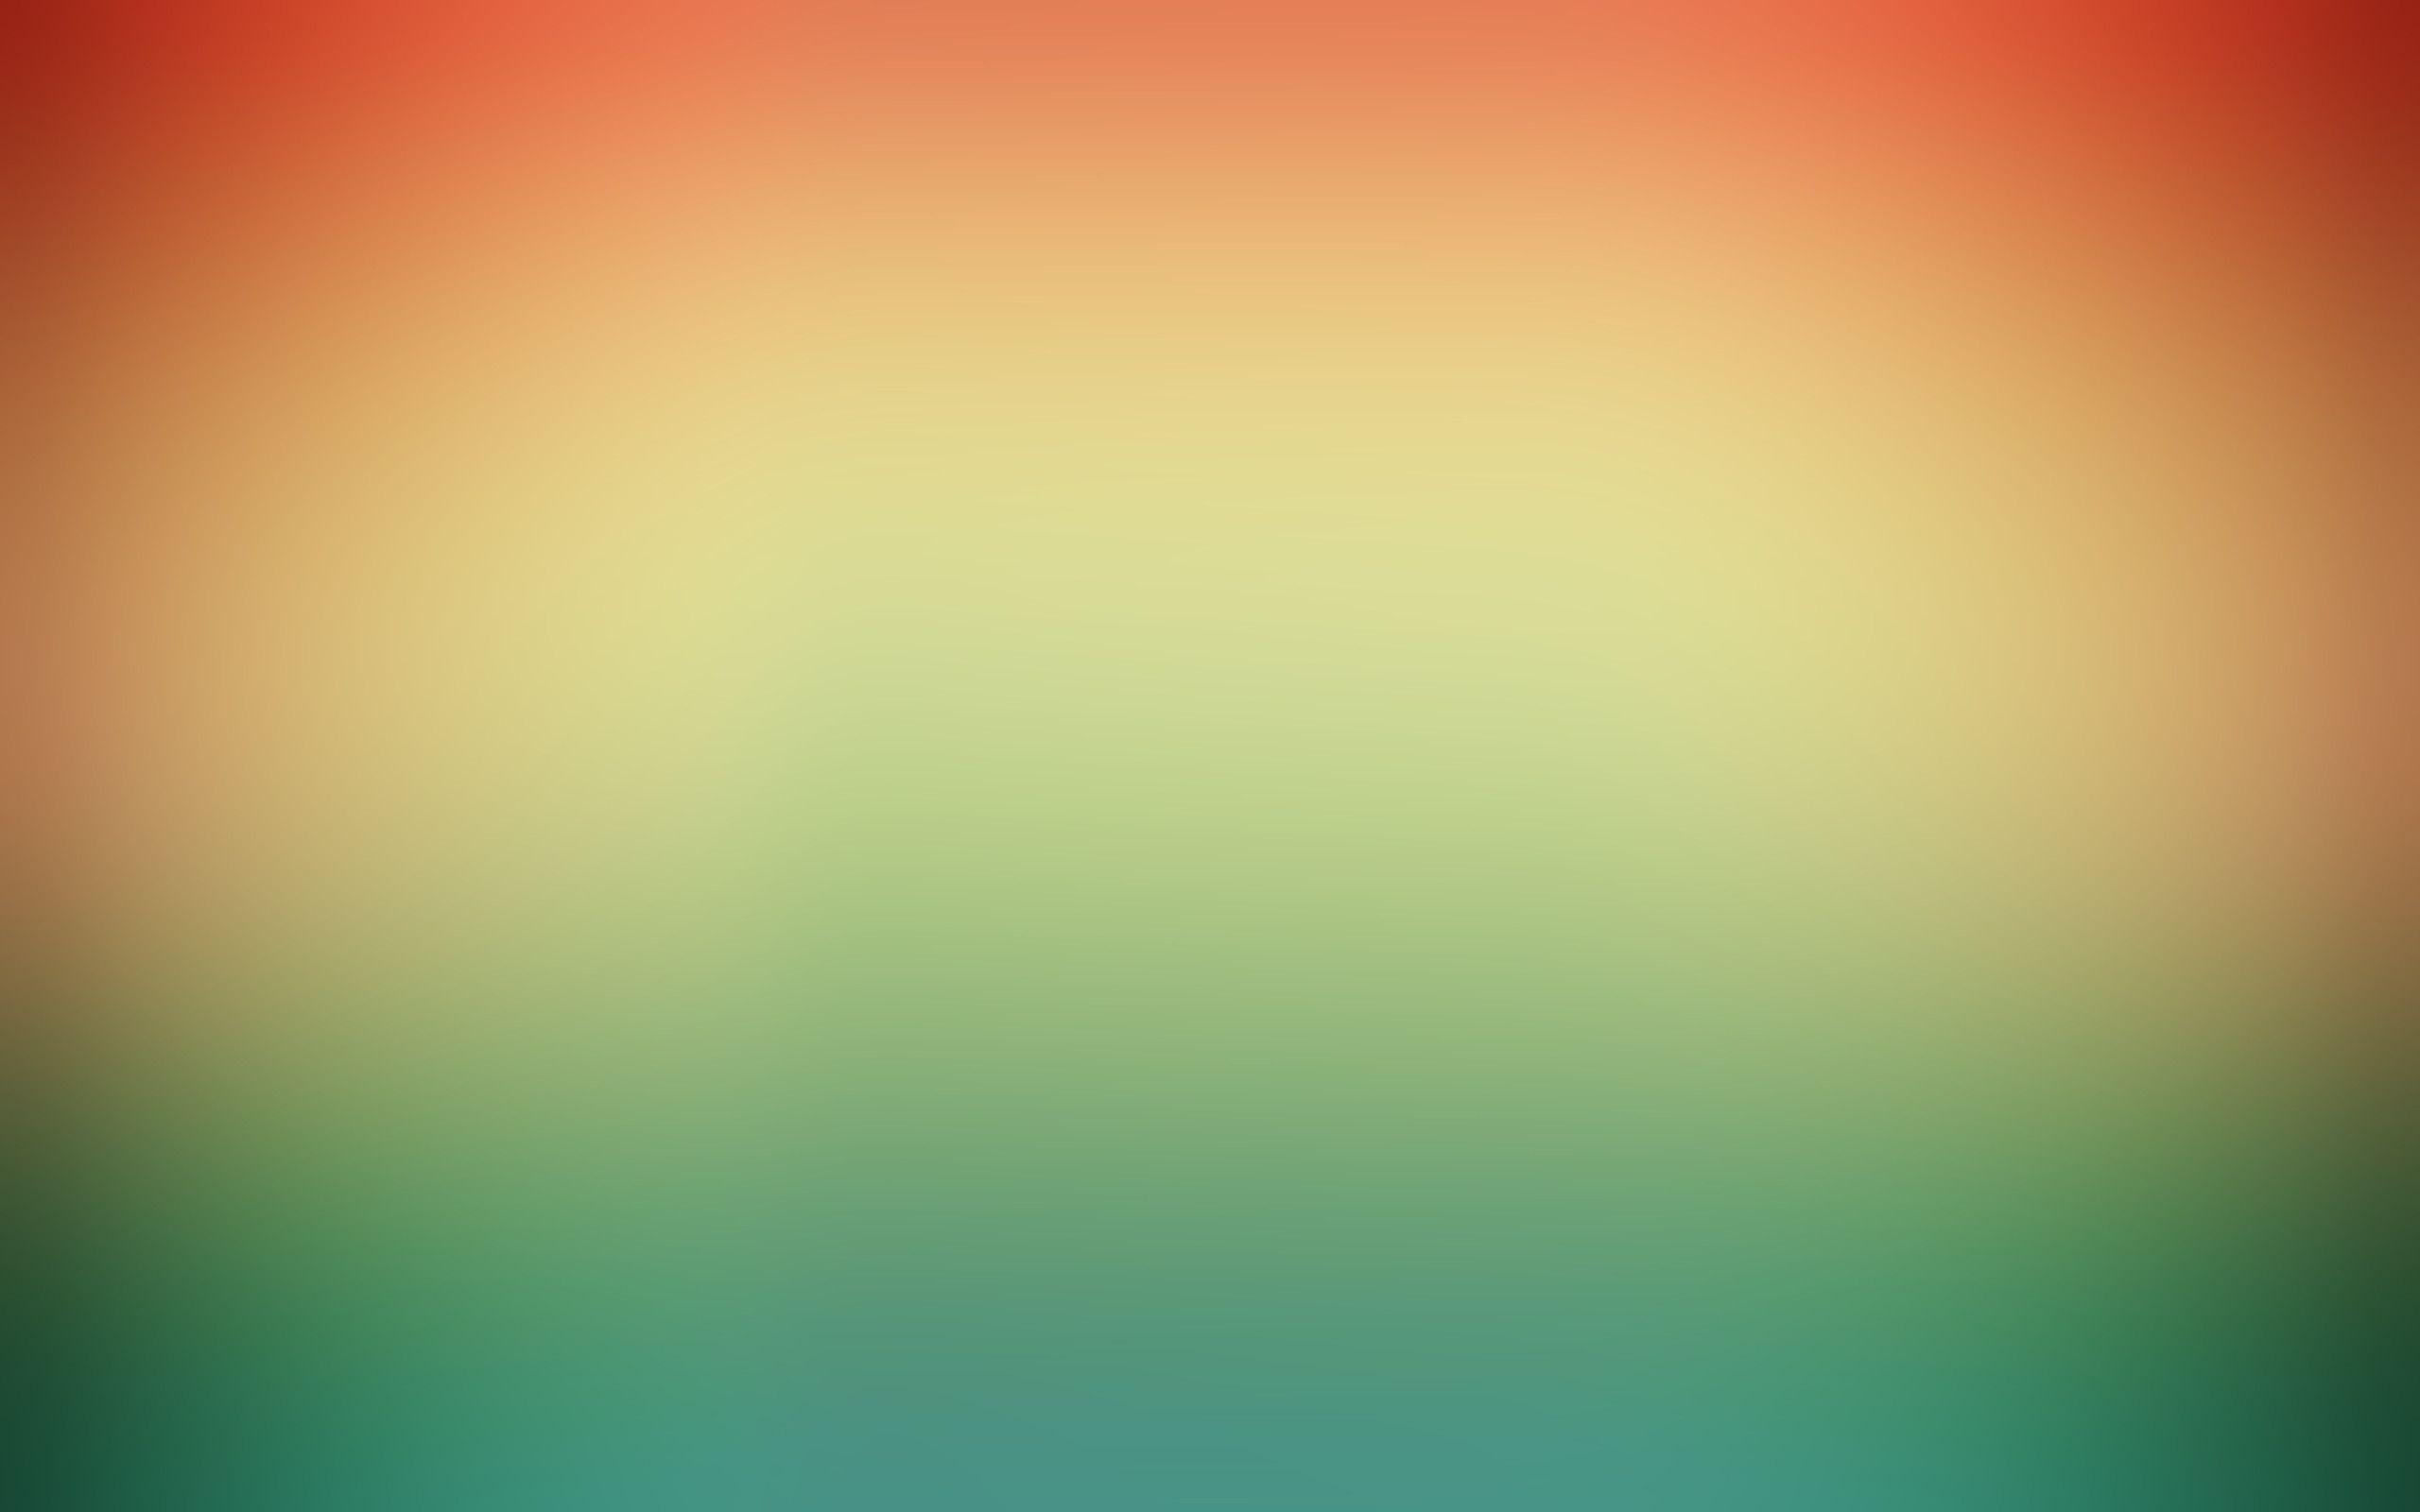 Gradient wallpaper for your Android smartphone or tablet